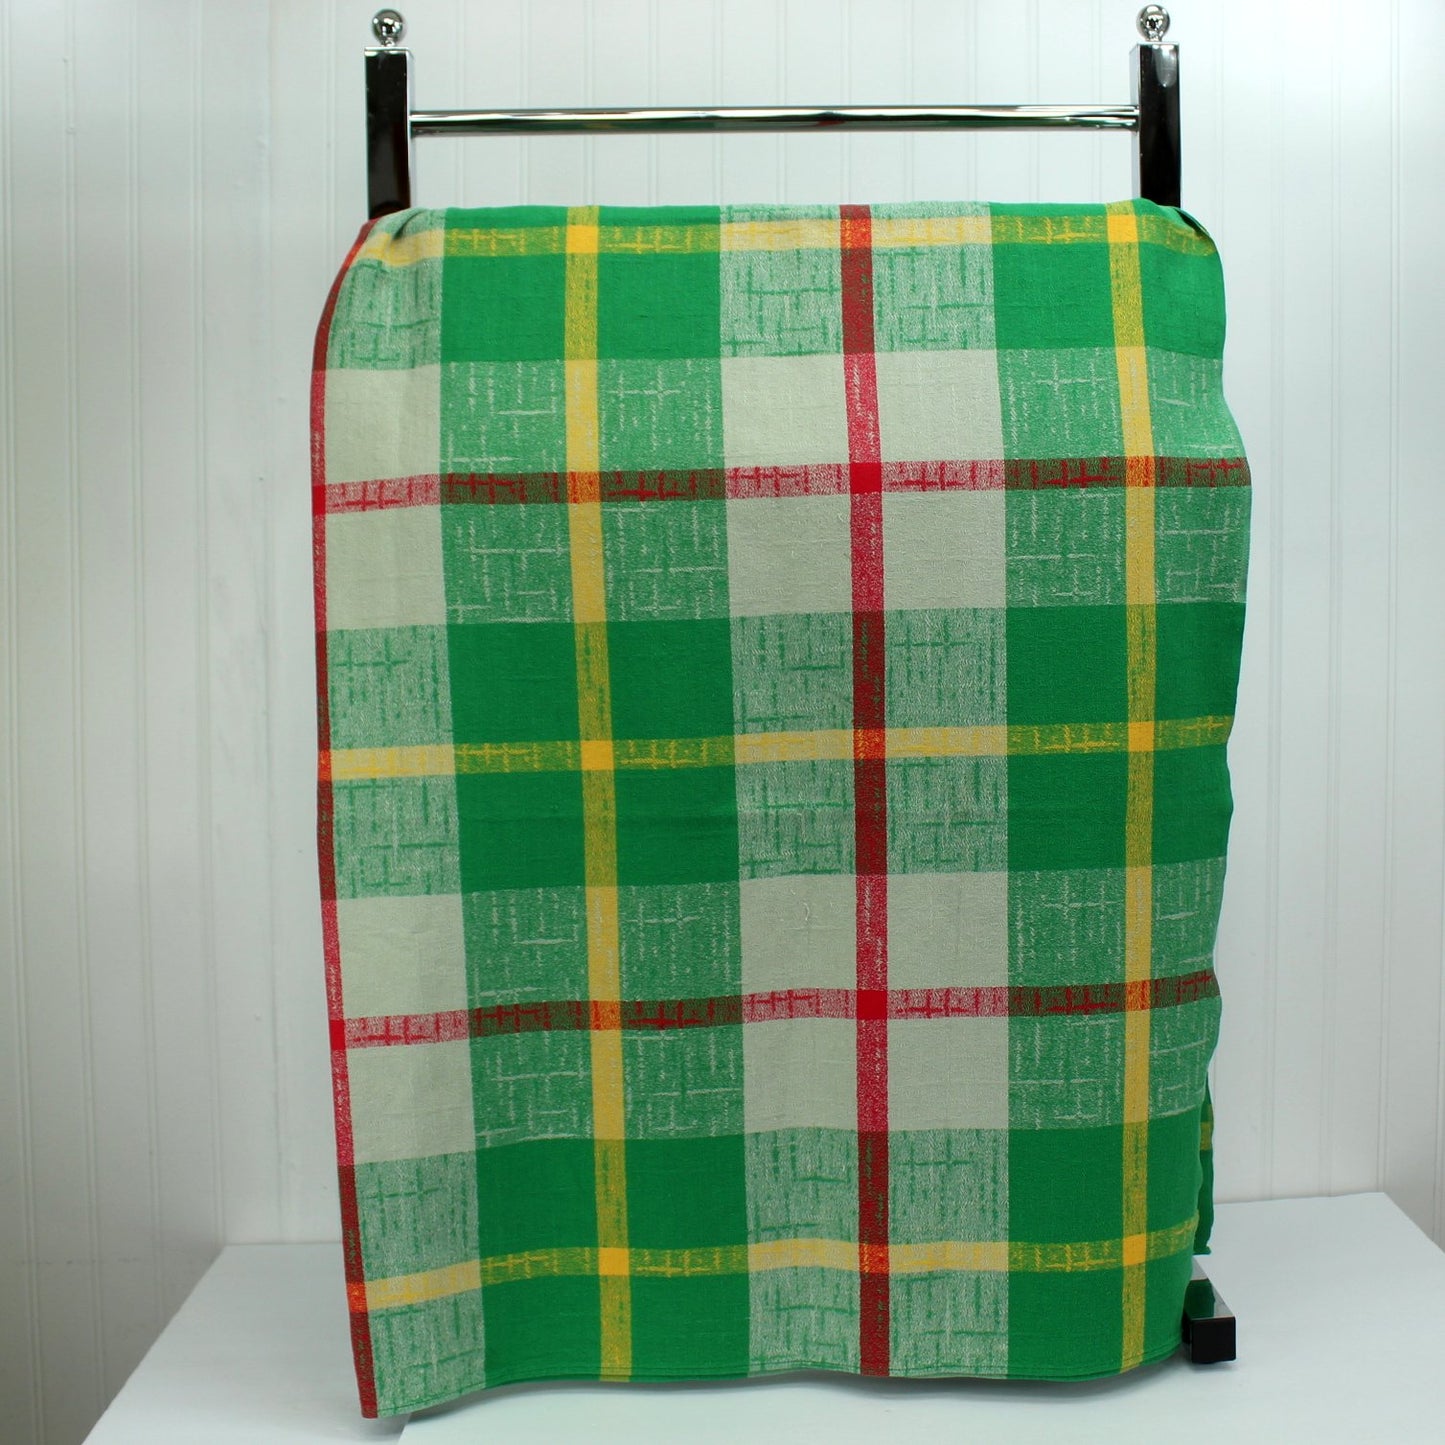 Simtex MCM Tablecloth Unusual Plaid Grey Green Red Cotton Heavy Weave  full view pattern